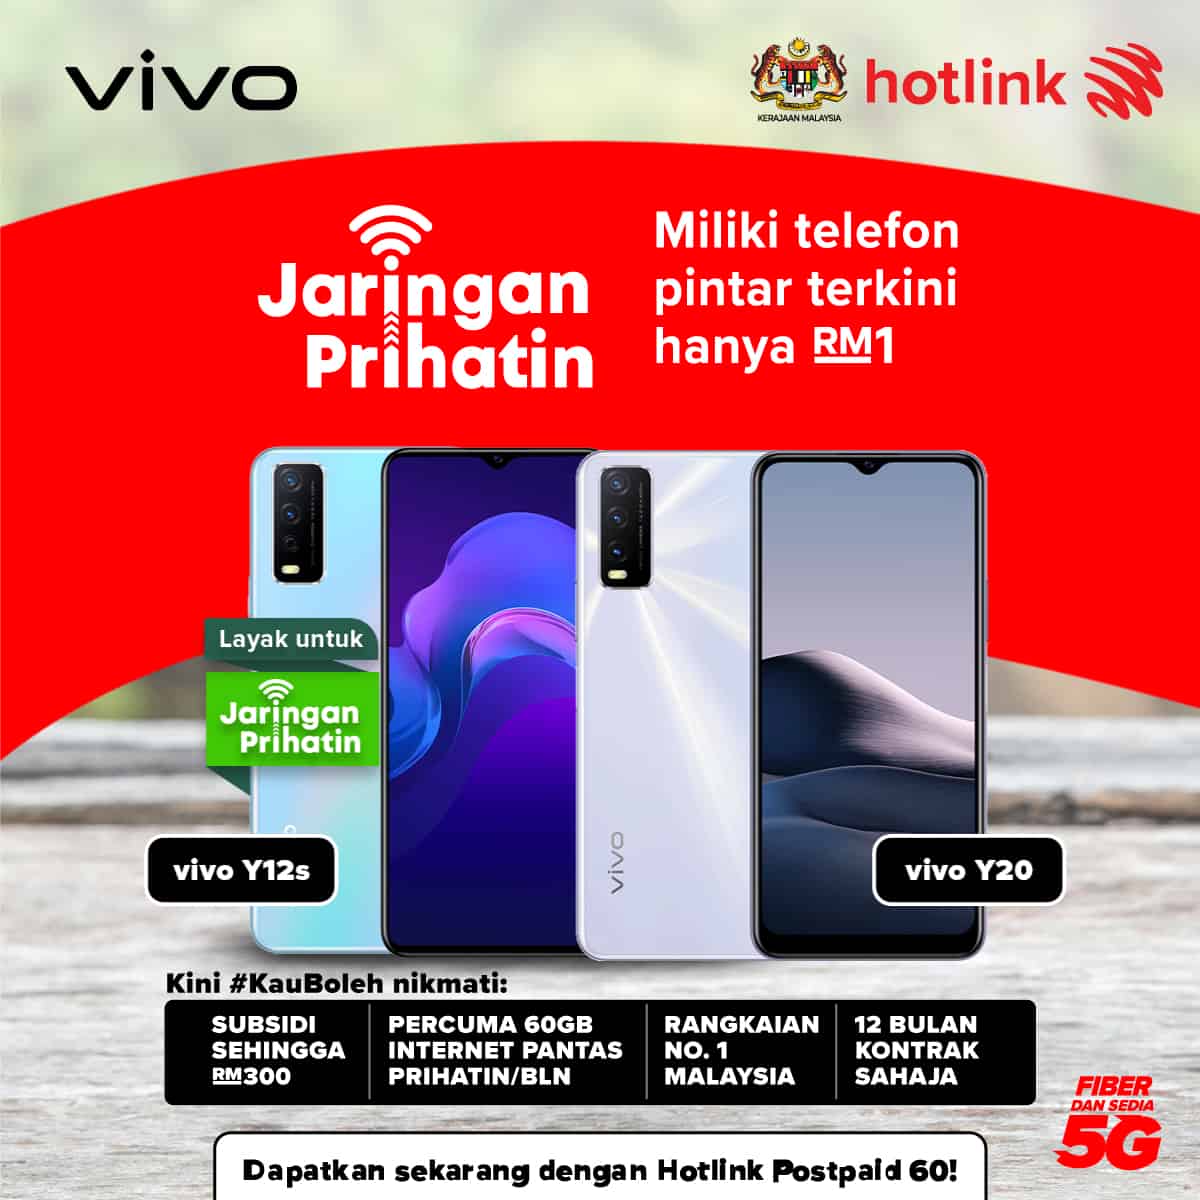 You are currently viewing vivo smartphones are now available from as low as RM1 under Jaringan Prihatin through Hotlink Postpaid